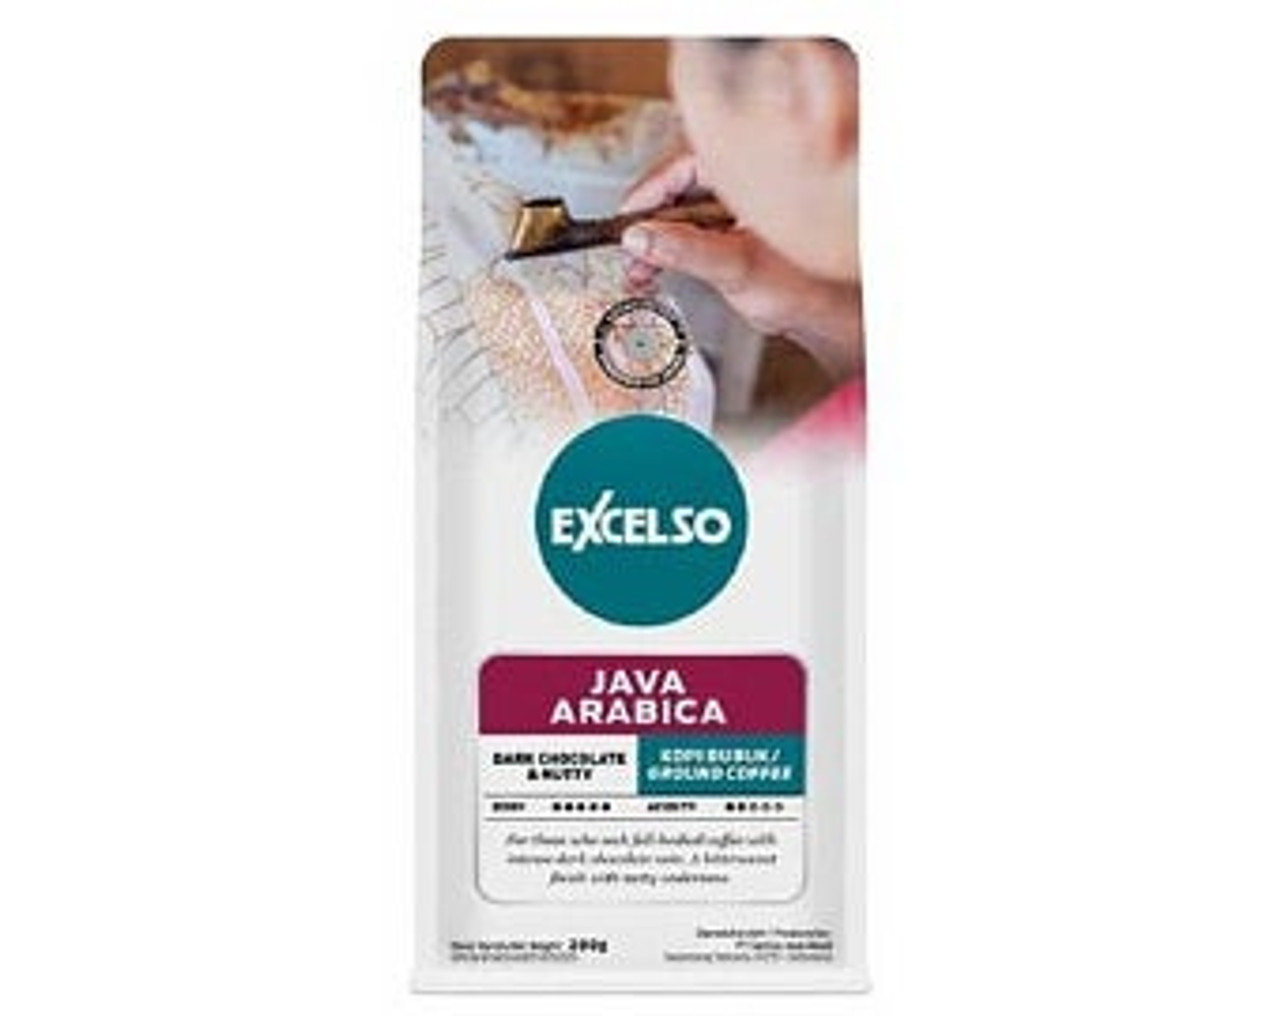 Excelso Java Arabica Ground Coffee, 200 Gram (Pouch)